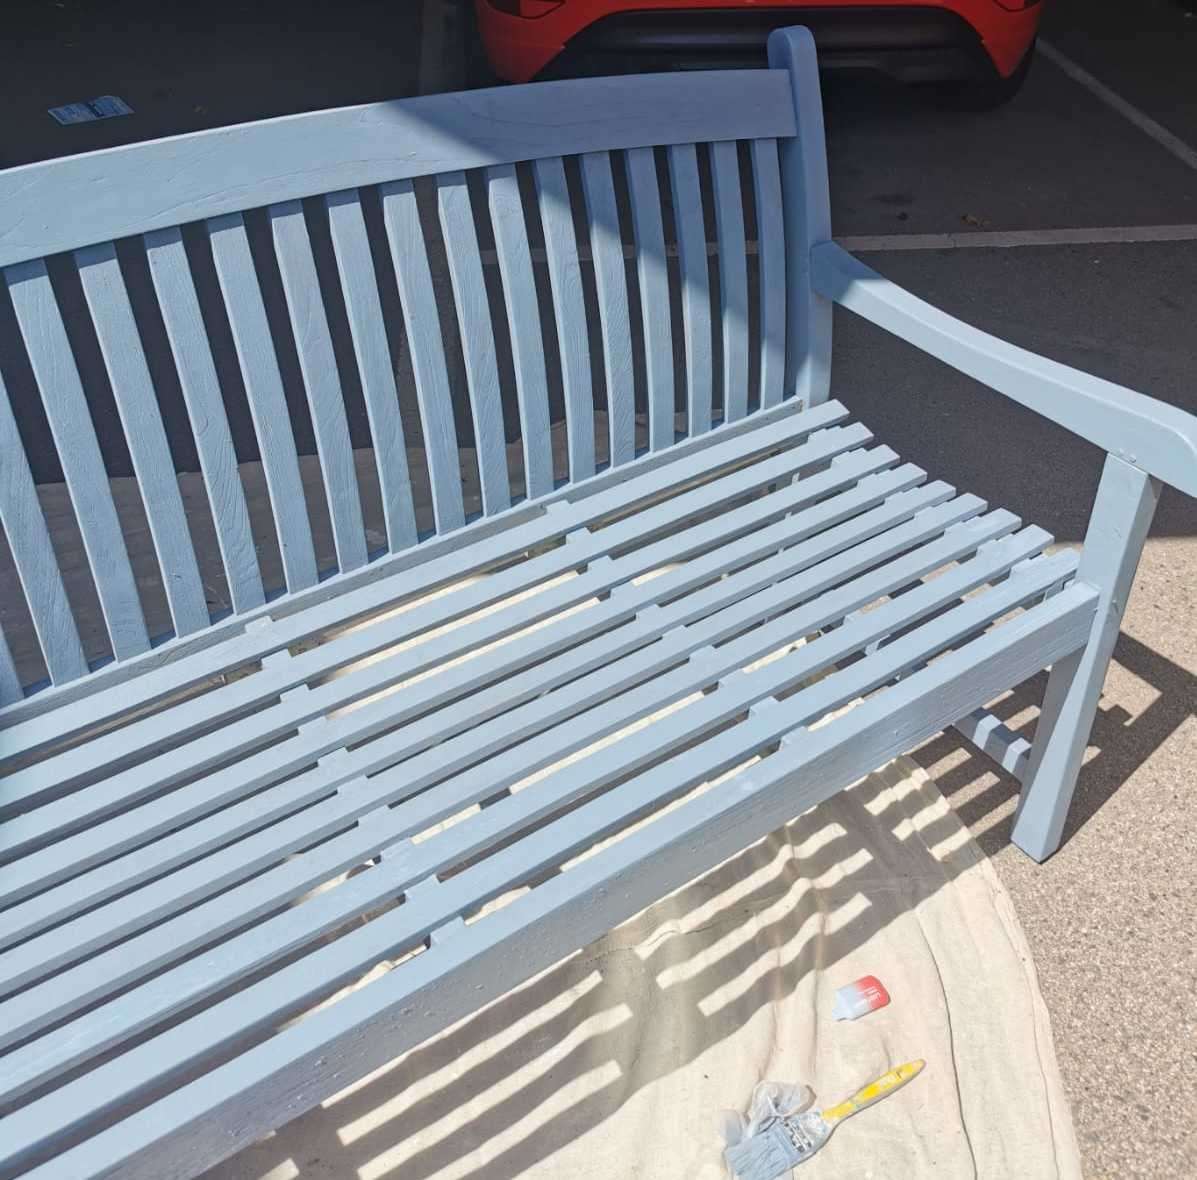 Ms Canning repaired the benches and gave them a fresh coat of blue paint. Photo: Kayley Canning